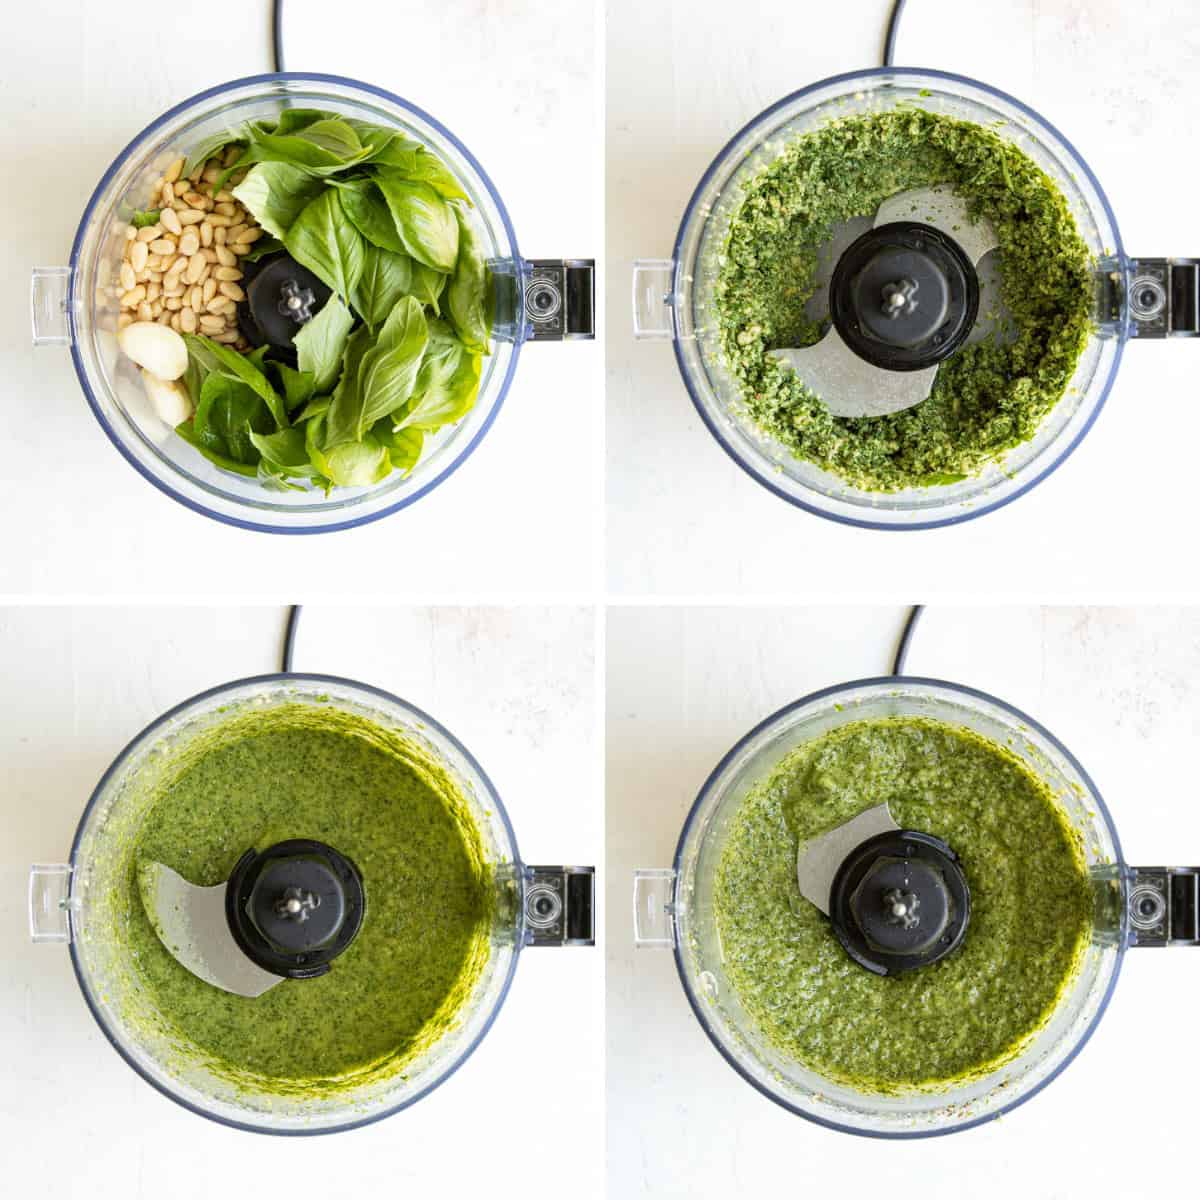 A step-by-step photo collage of how to make homemade basil pesto.